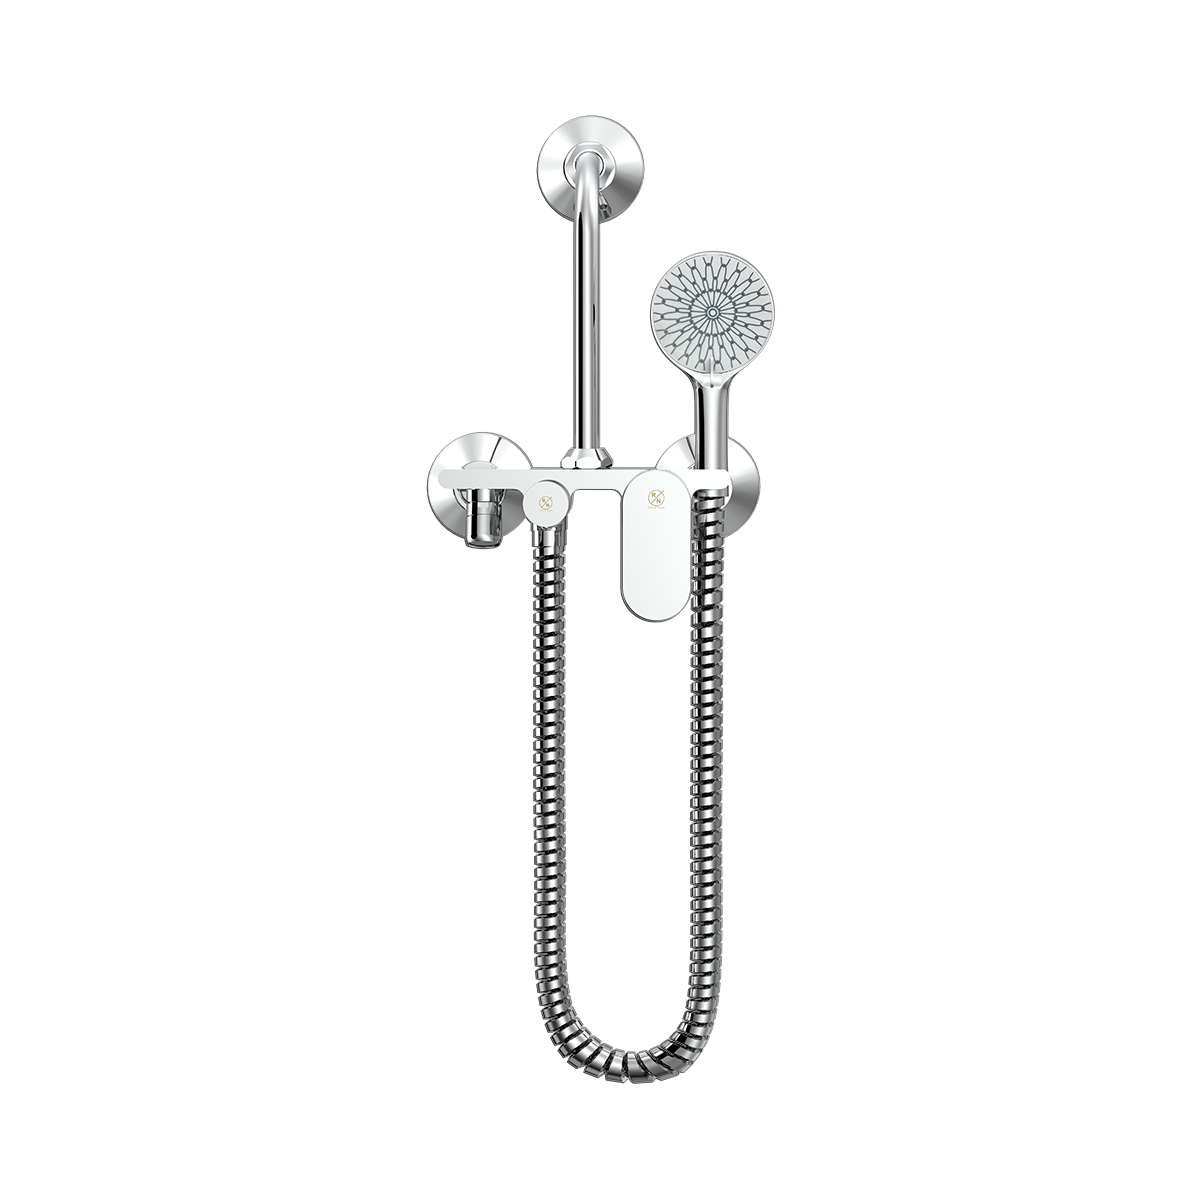 Single Lever Wall Mixer With Provision For Both Ov